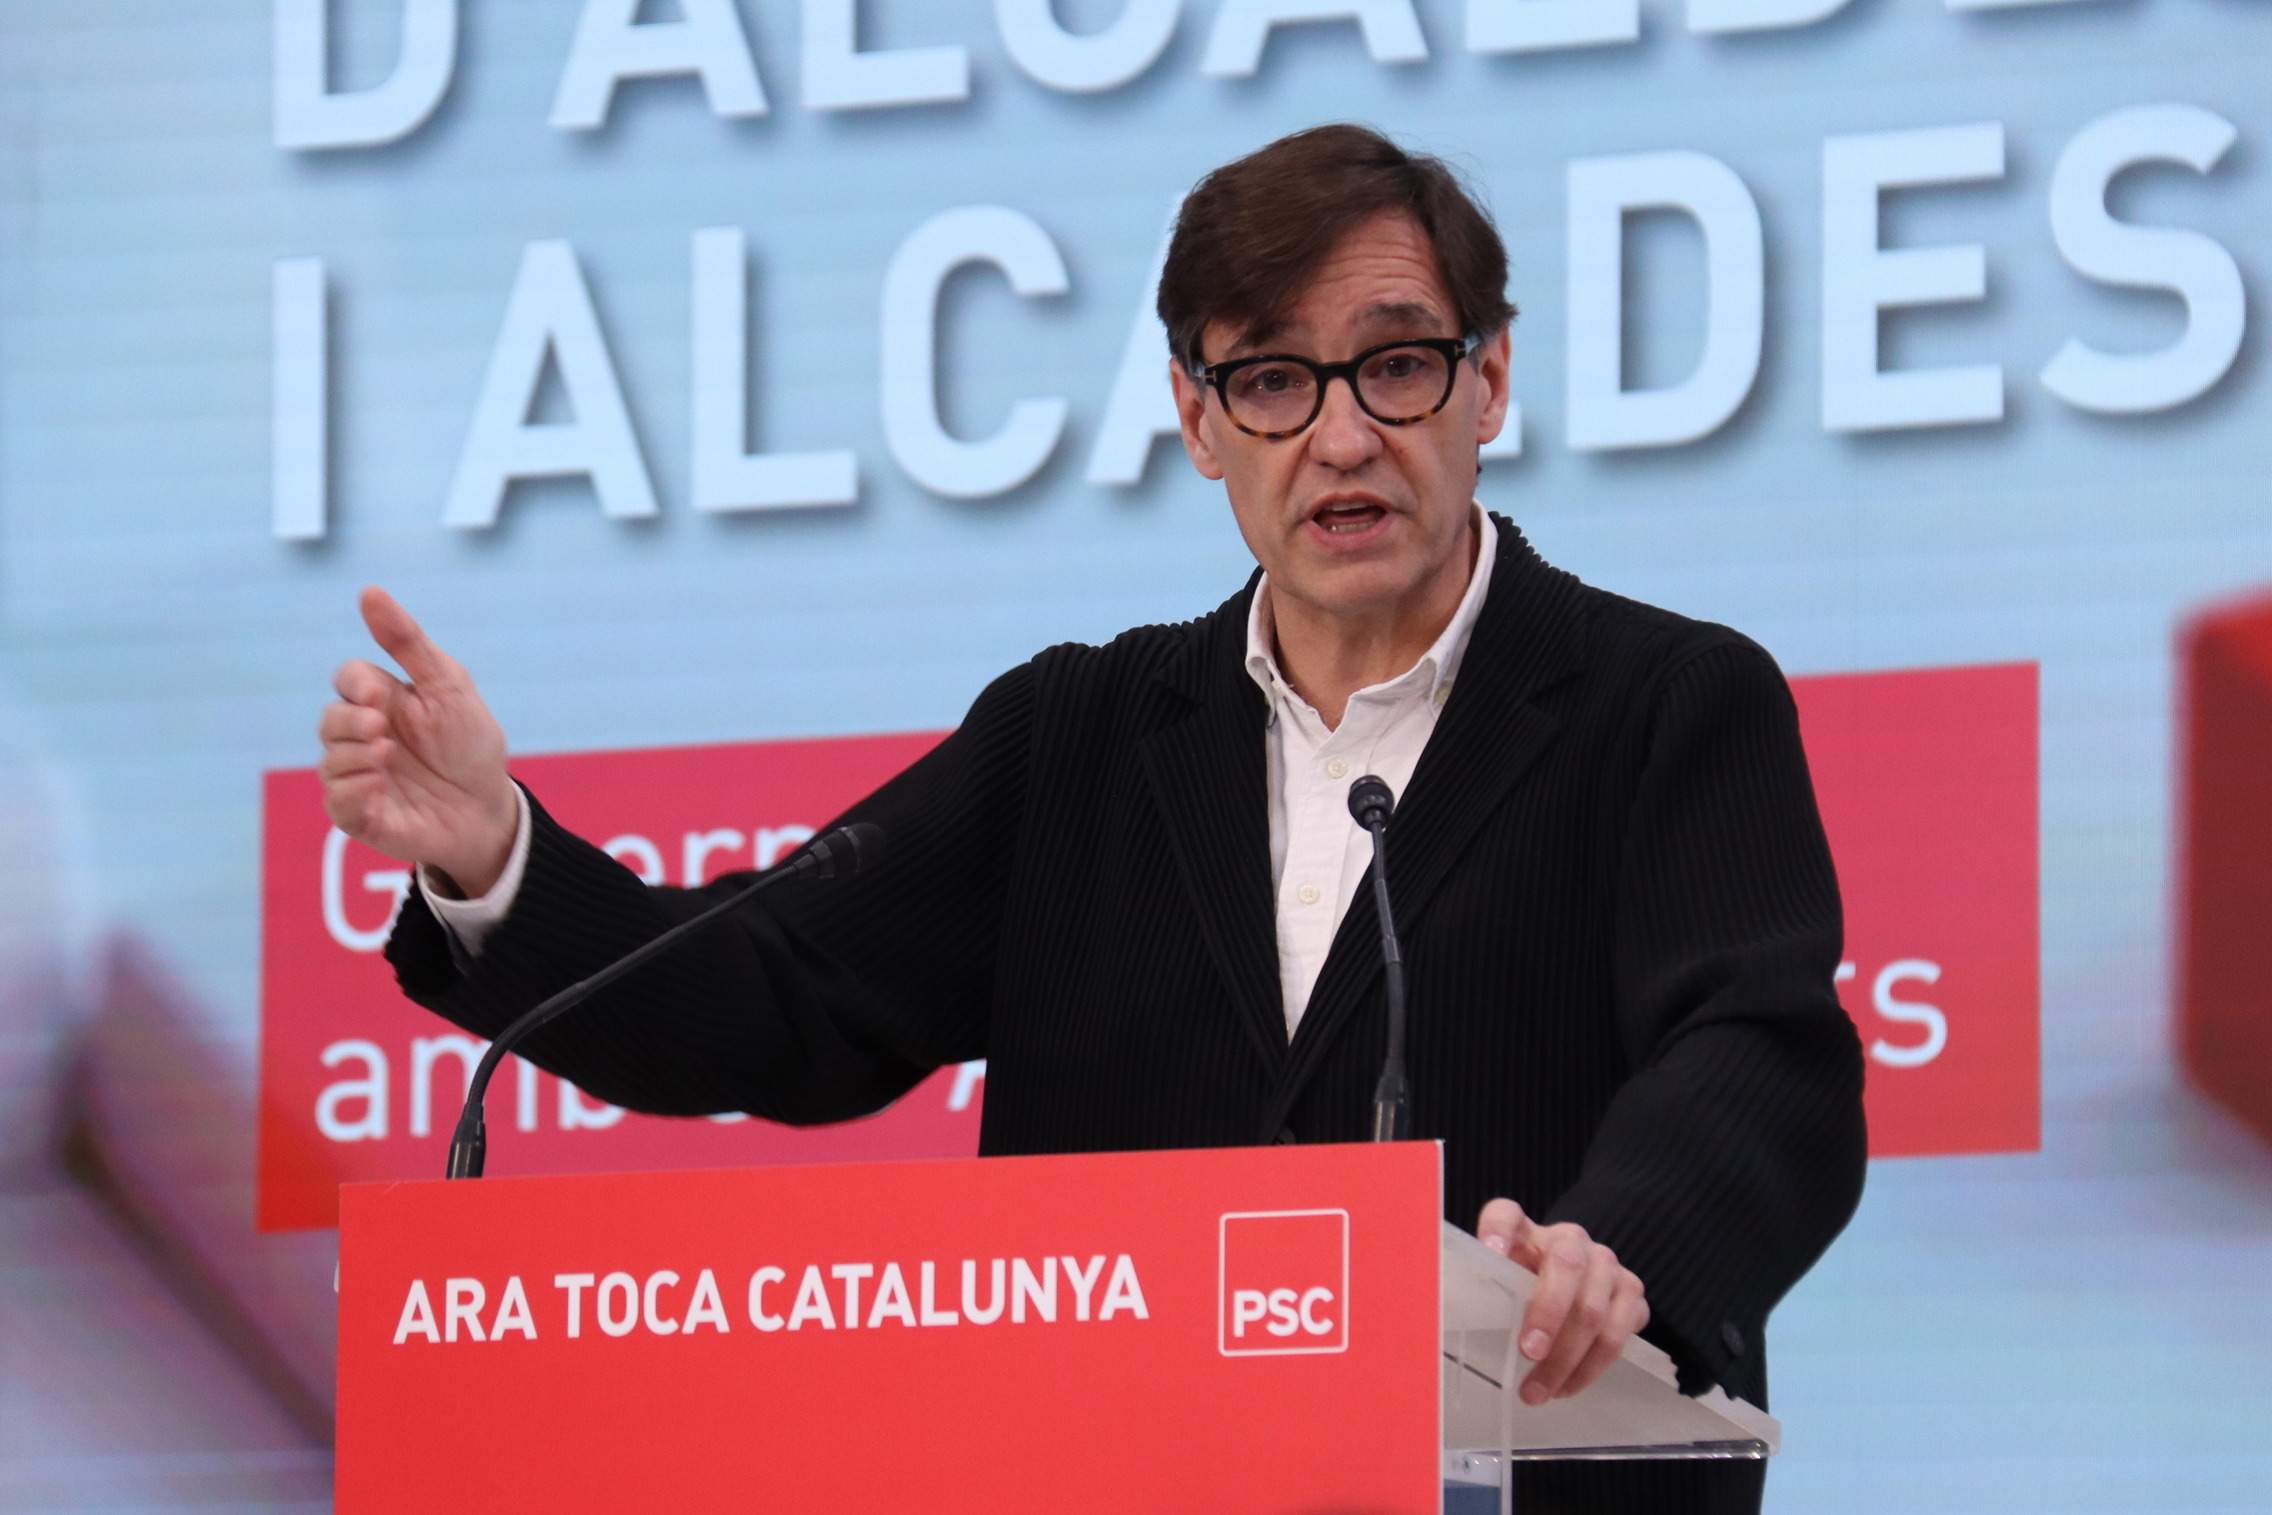 Catalan Socialist leader Illa tells 'The Times' that Spain sees more danger in Vox than Puigdemont